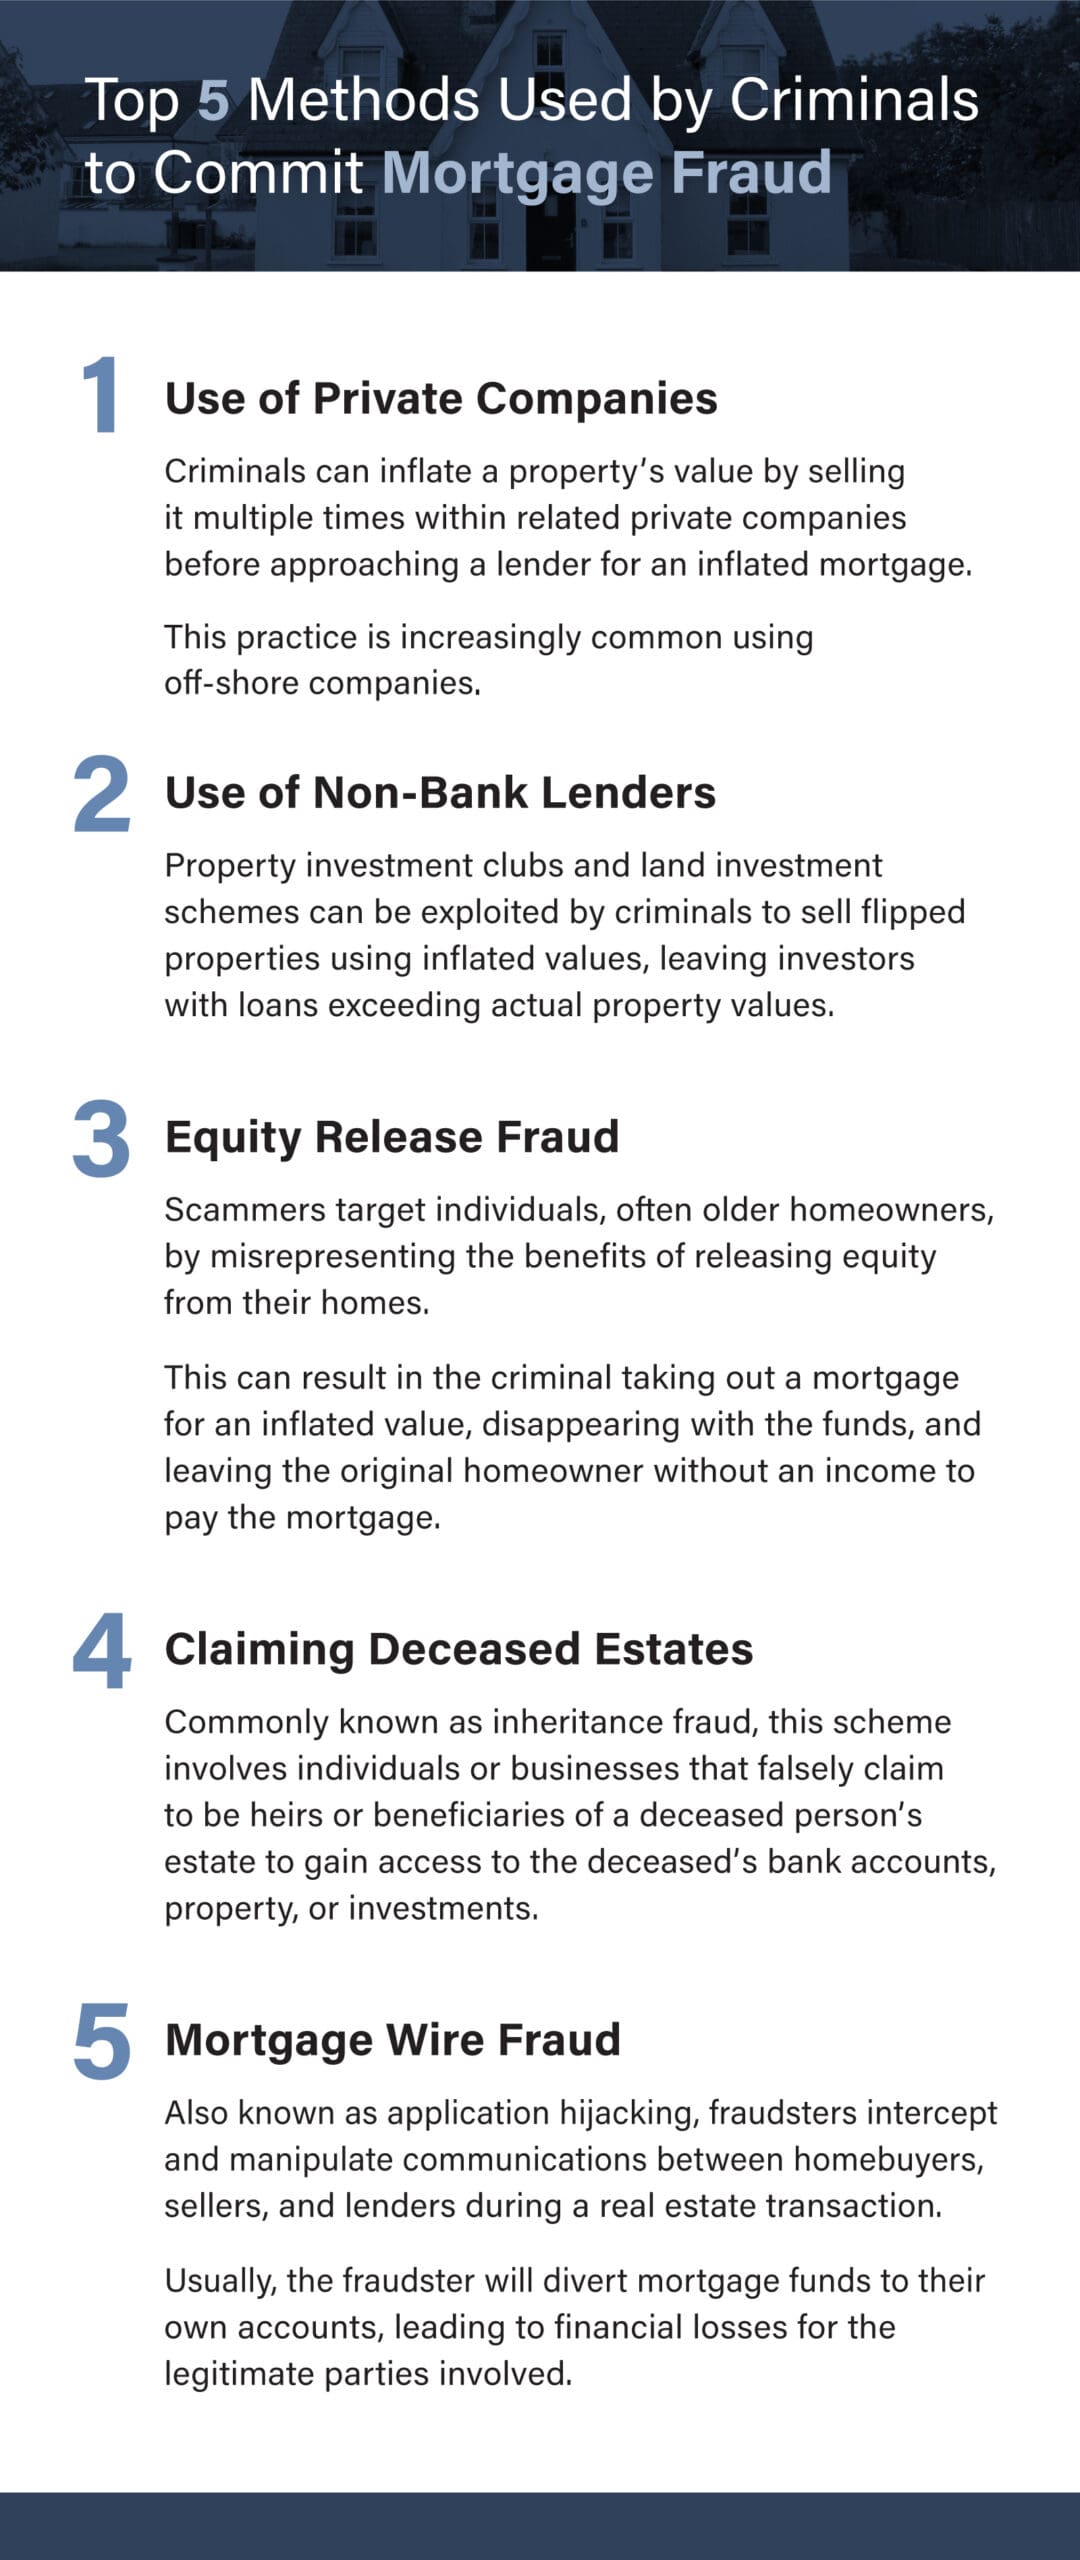 Top methods used to commit mortgage fraud